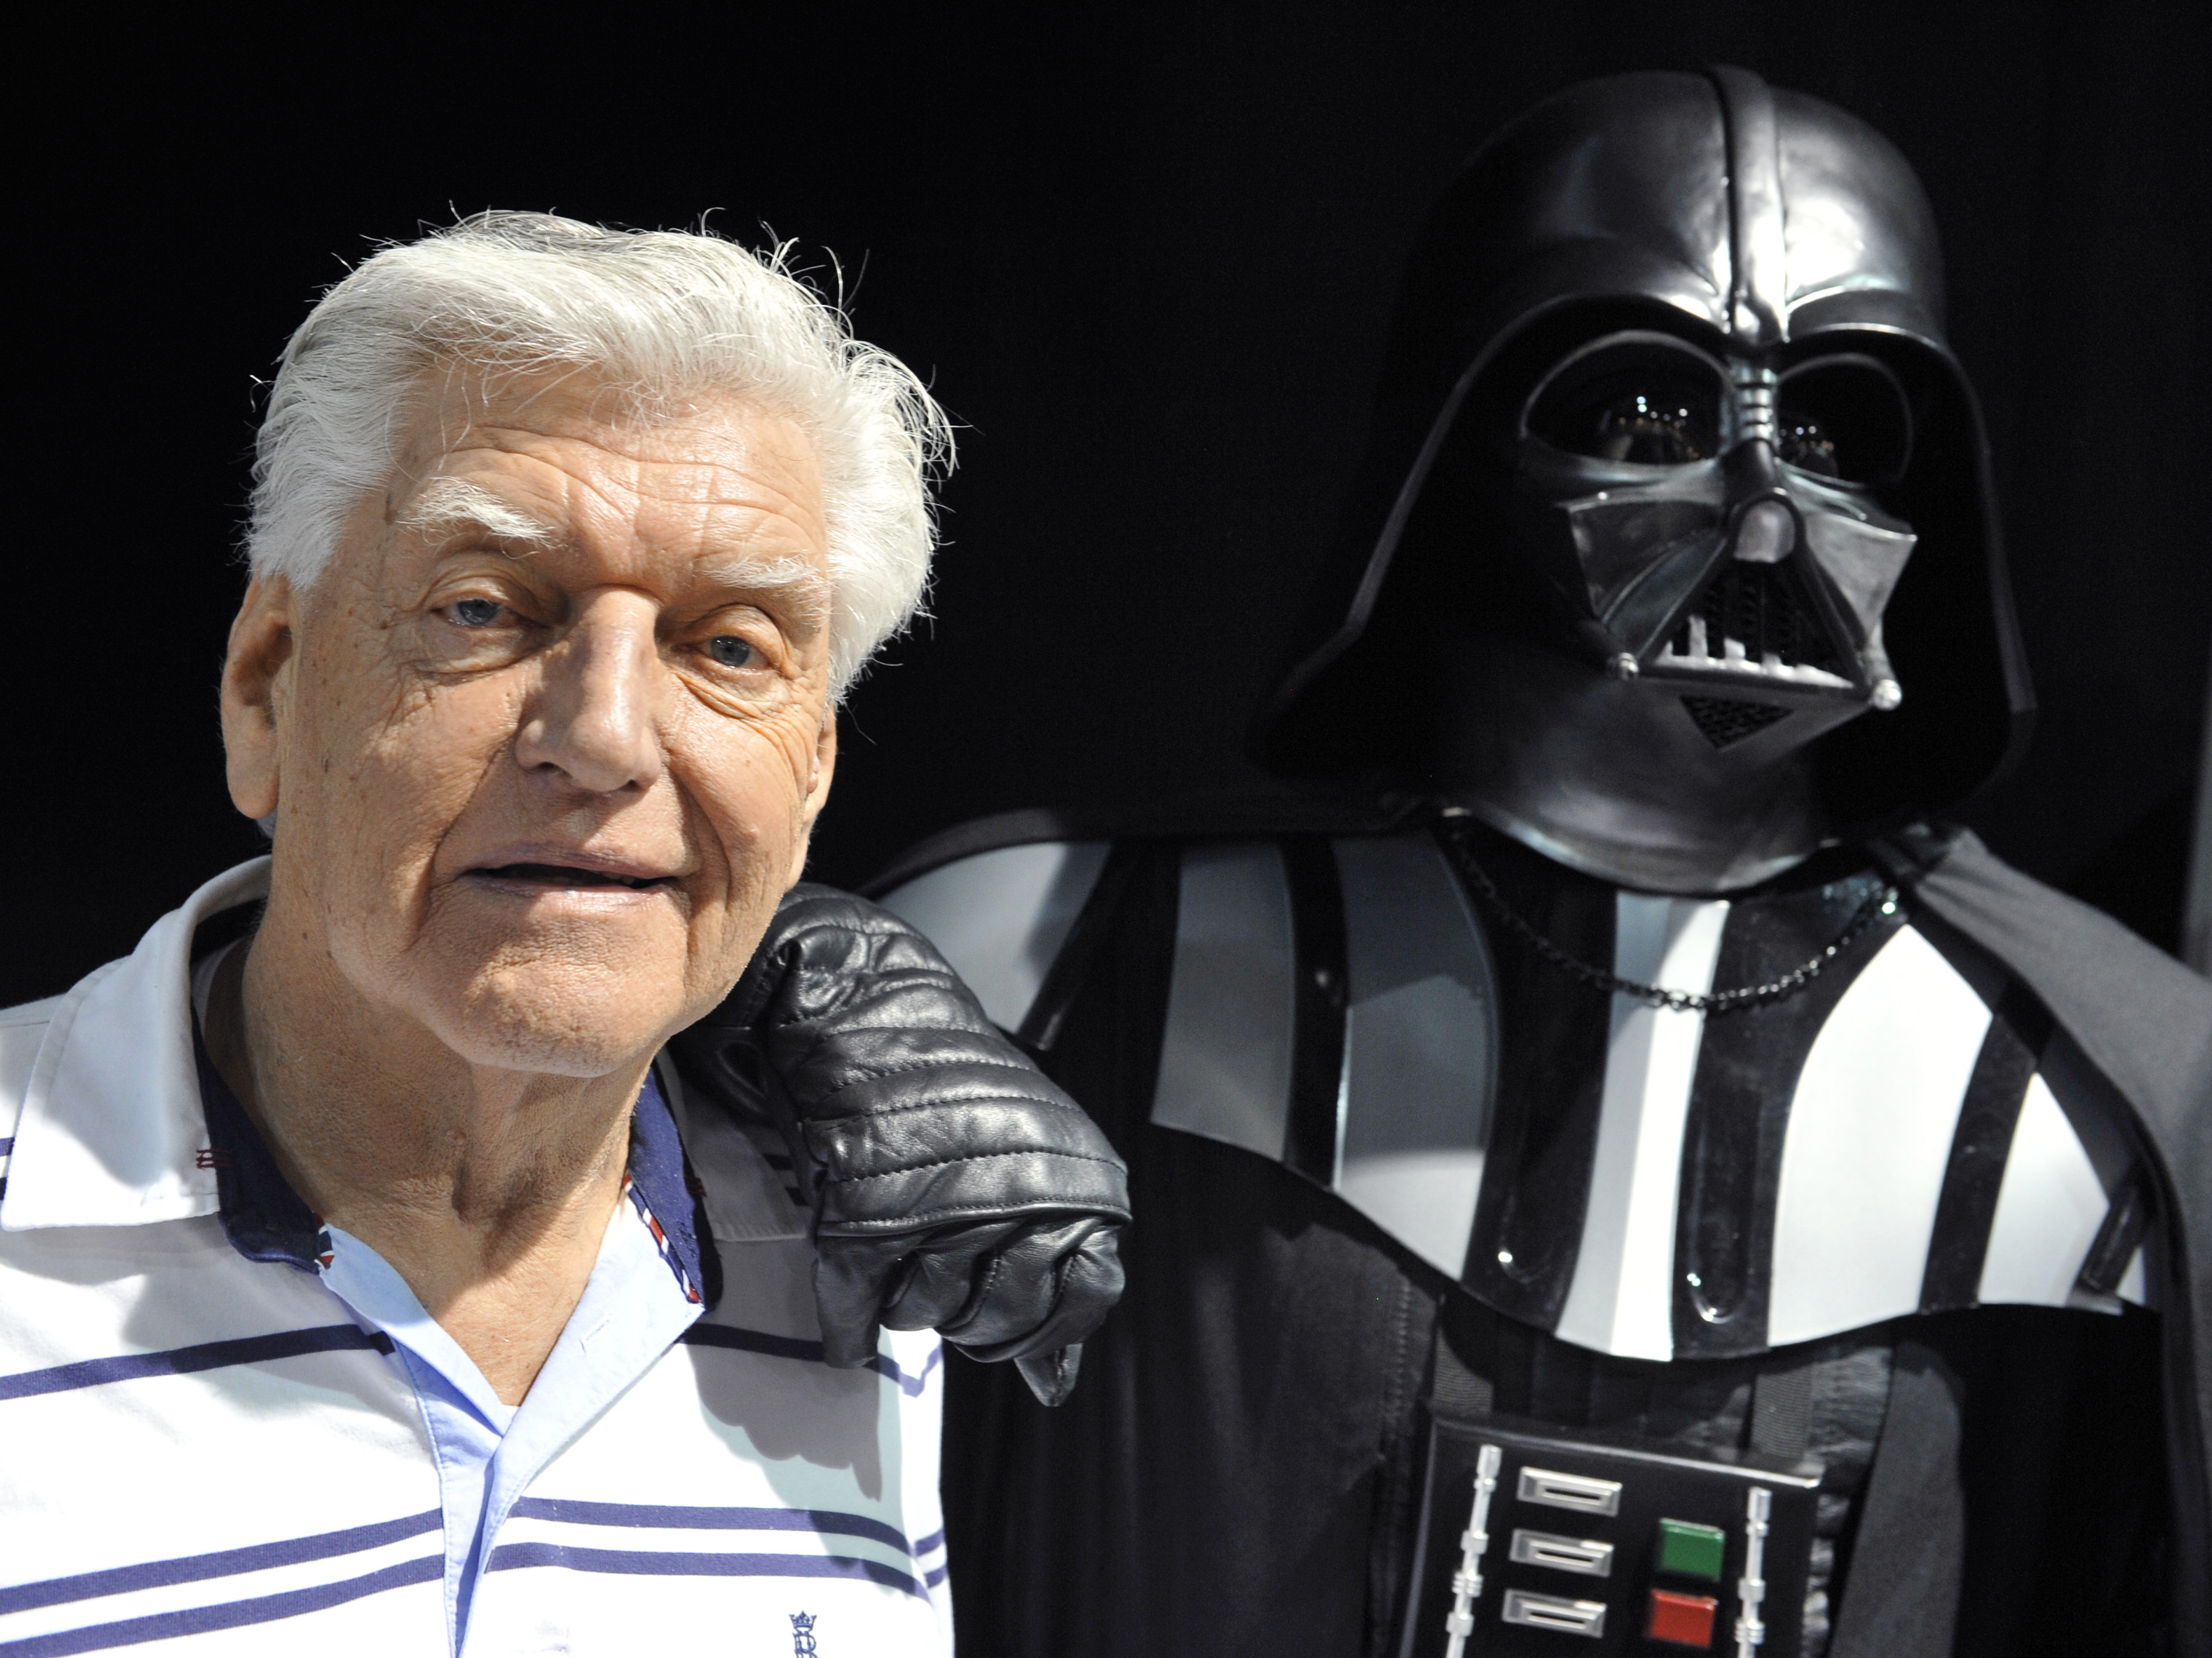 Who is the actor behind Darth Vader's voice in the Star Wars movies?